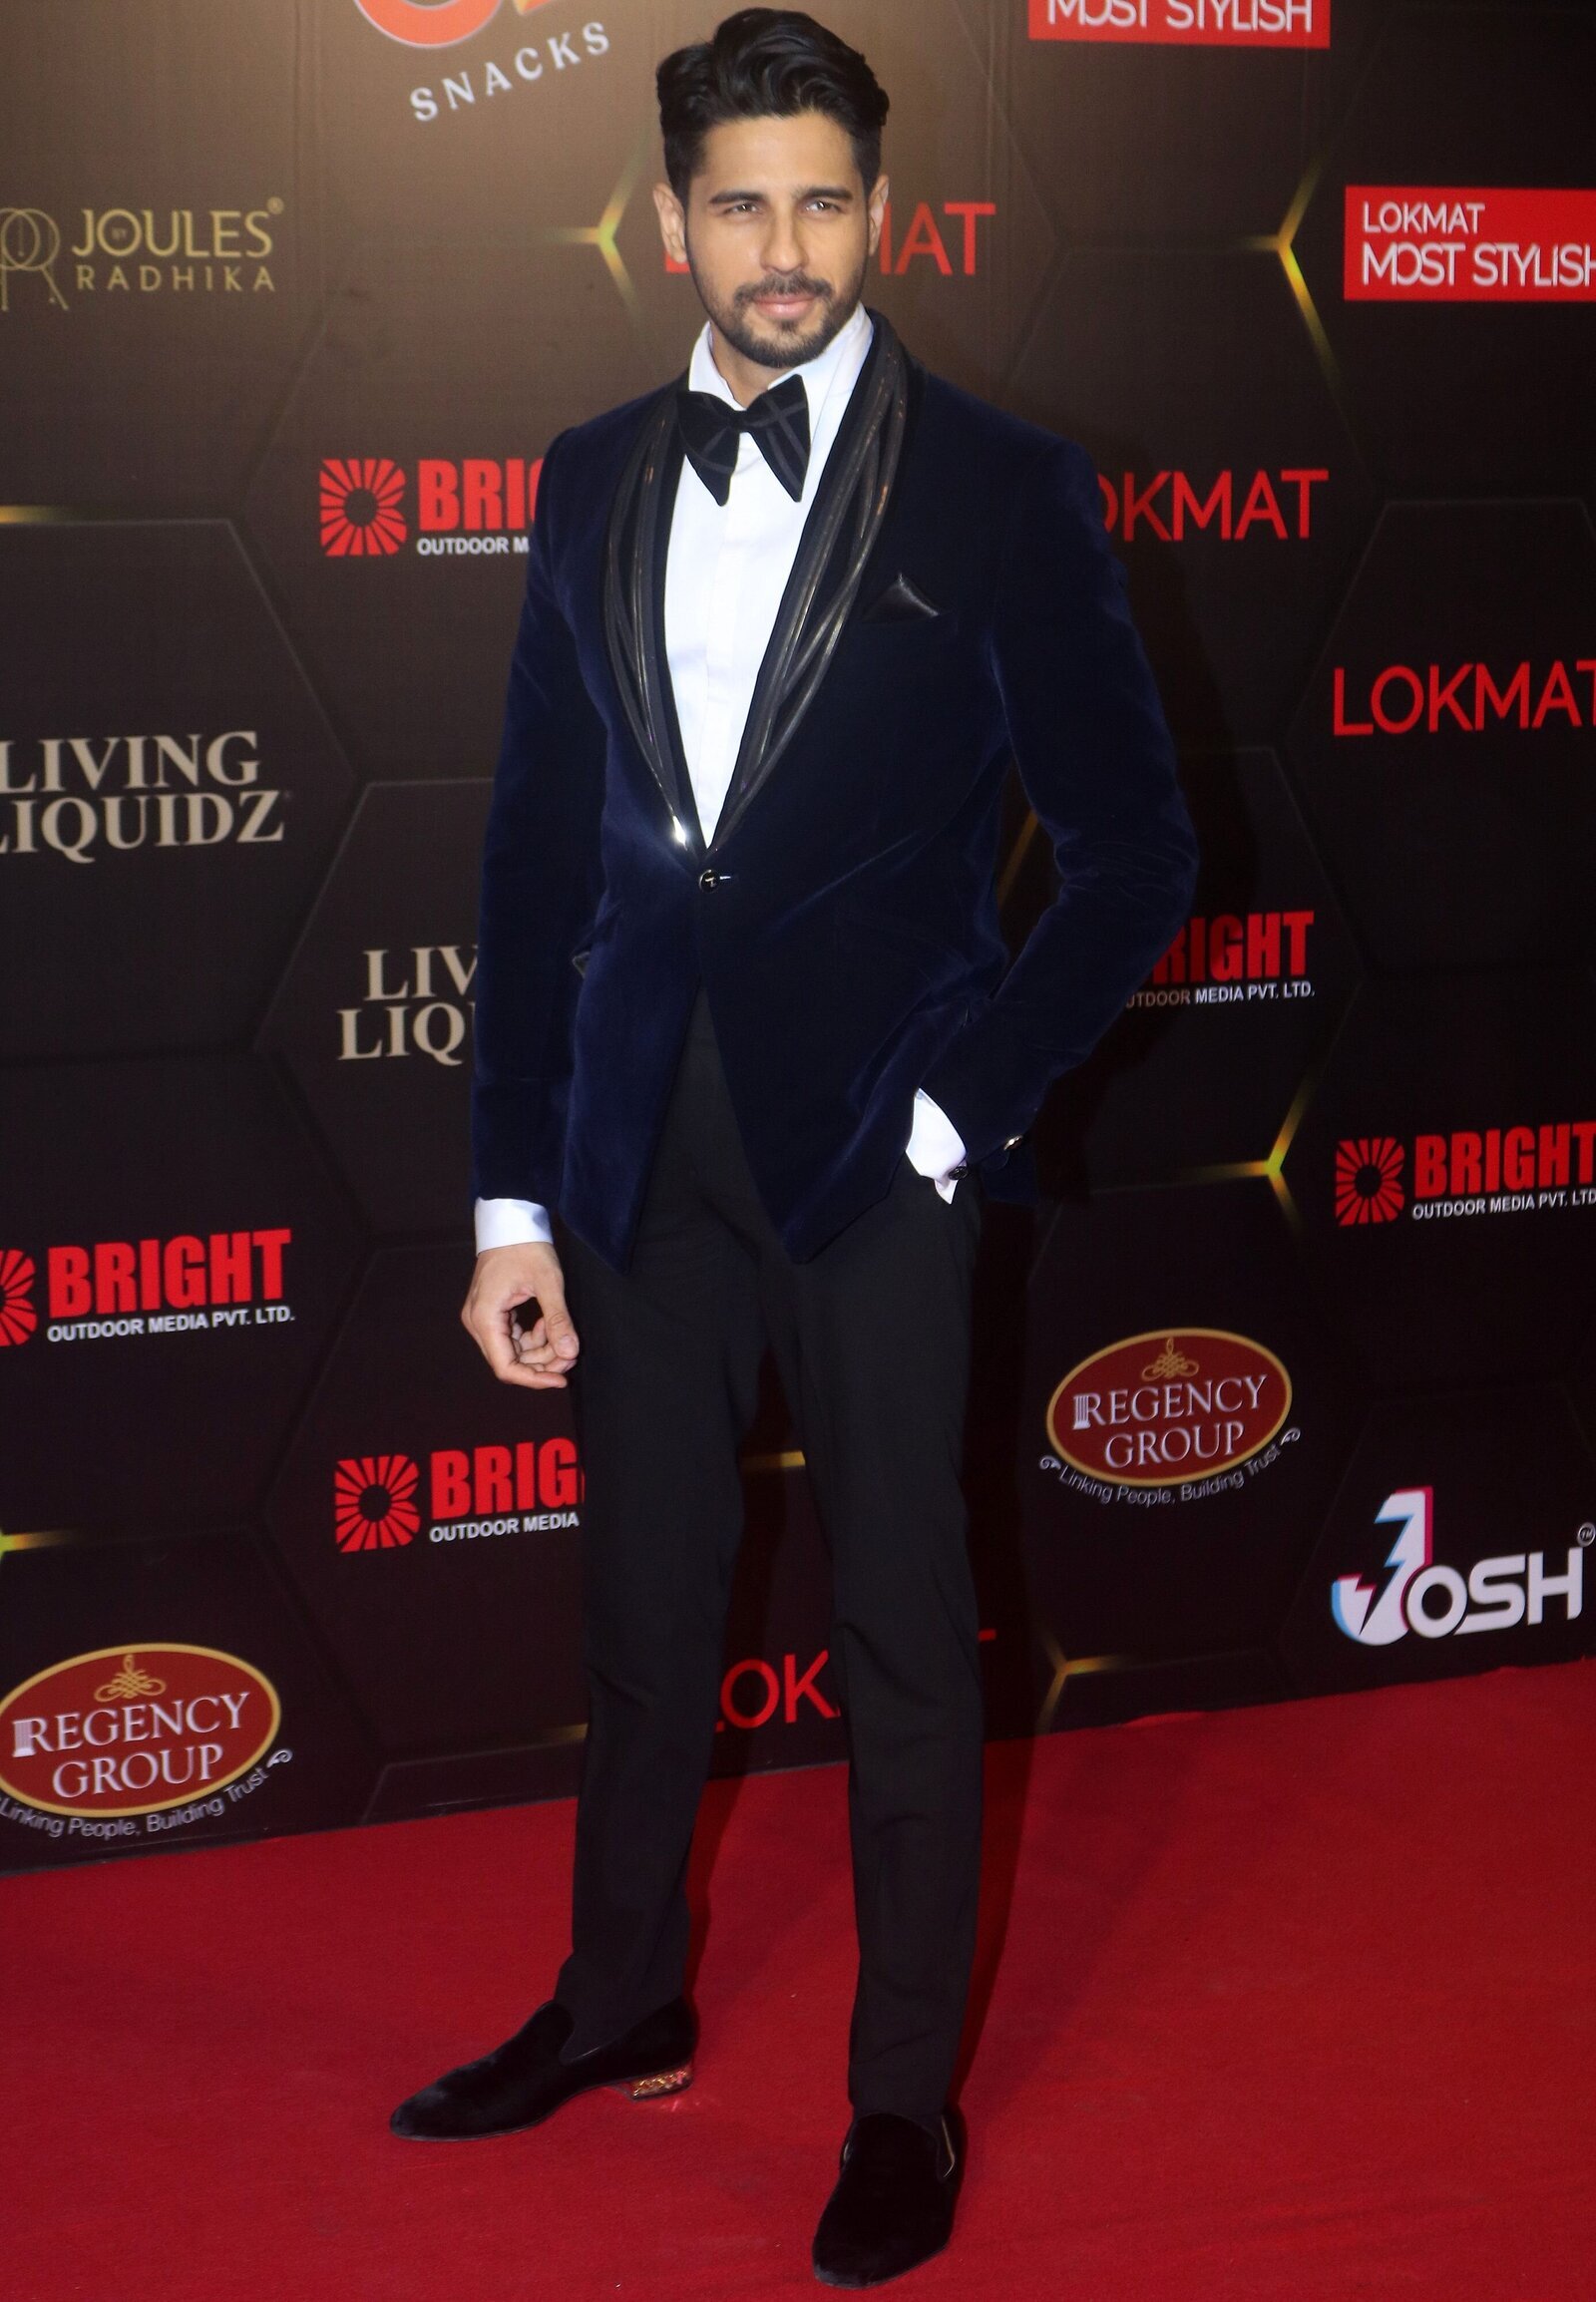 Sidharth Malhotra - Photos: Celebs At The Lokmat Most Stylish Awards 2021 | Picture 1845752